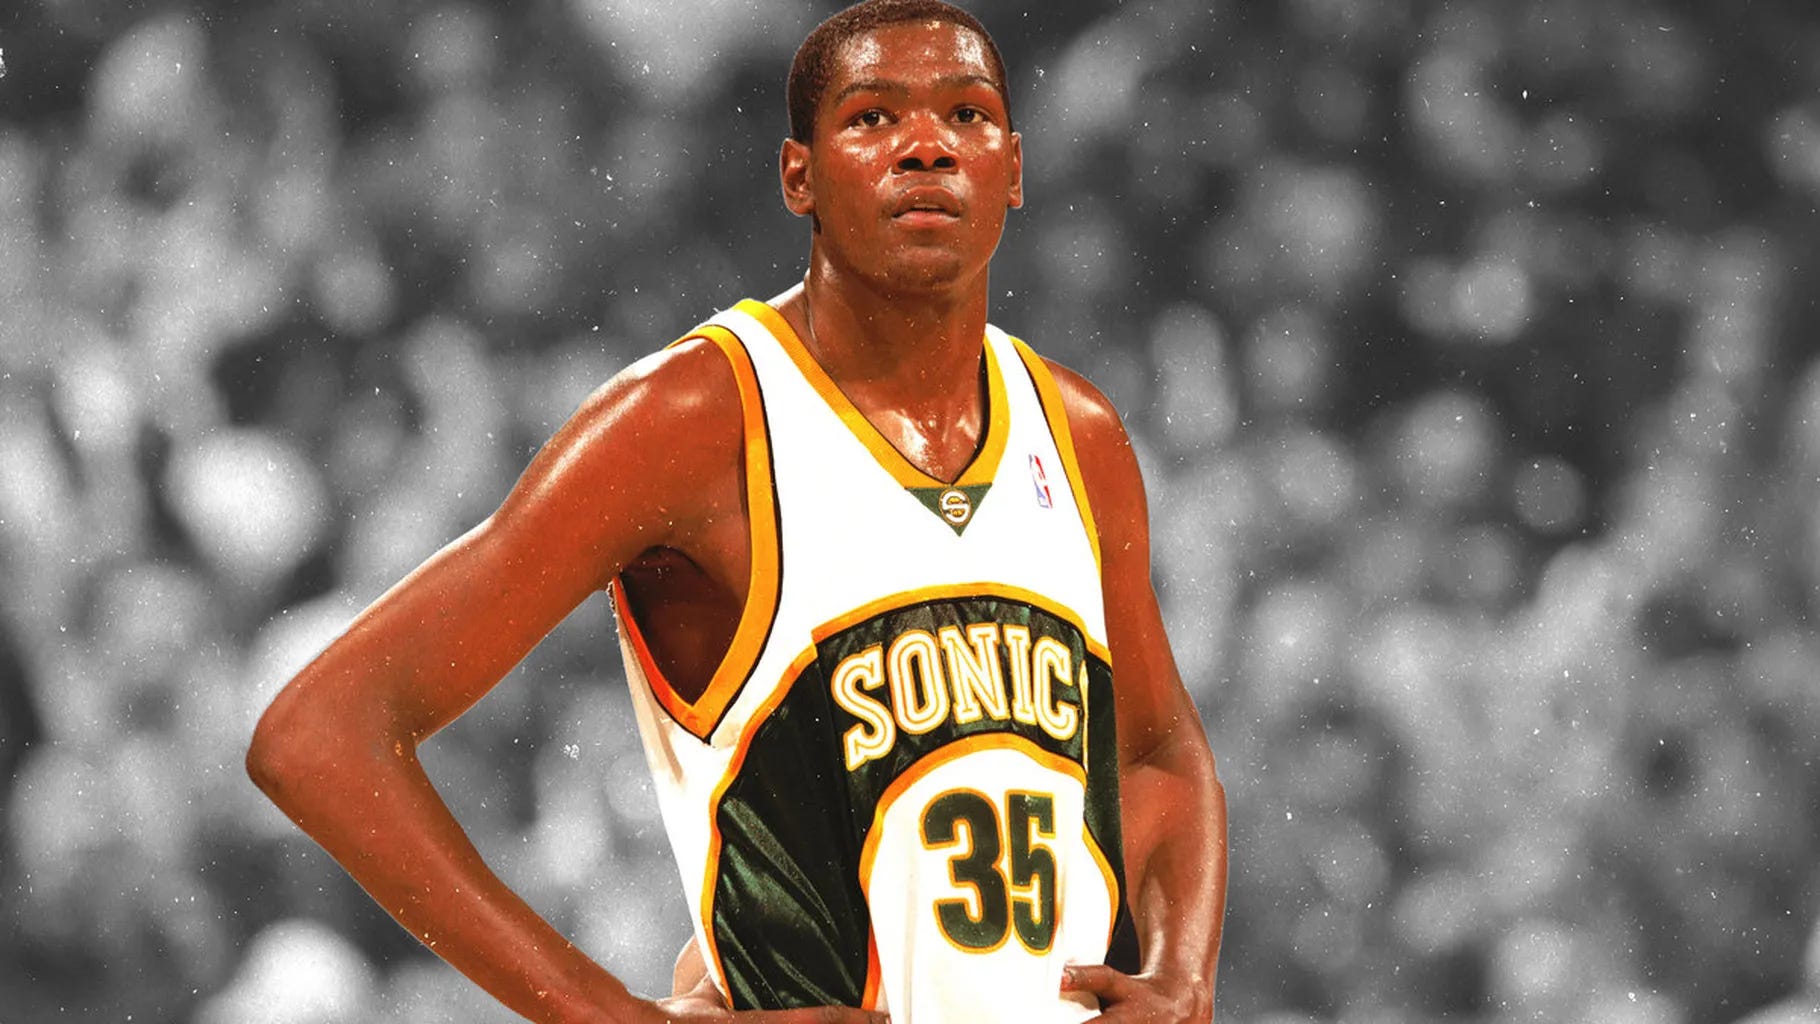 Kevin Durant during his 2007-08 rookie campaign, which was also the SuperSonics’ last in Seattle.